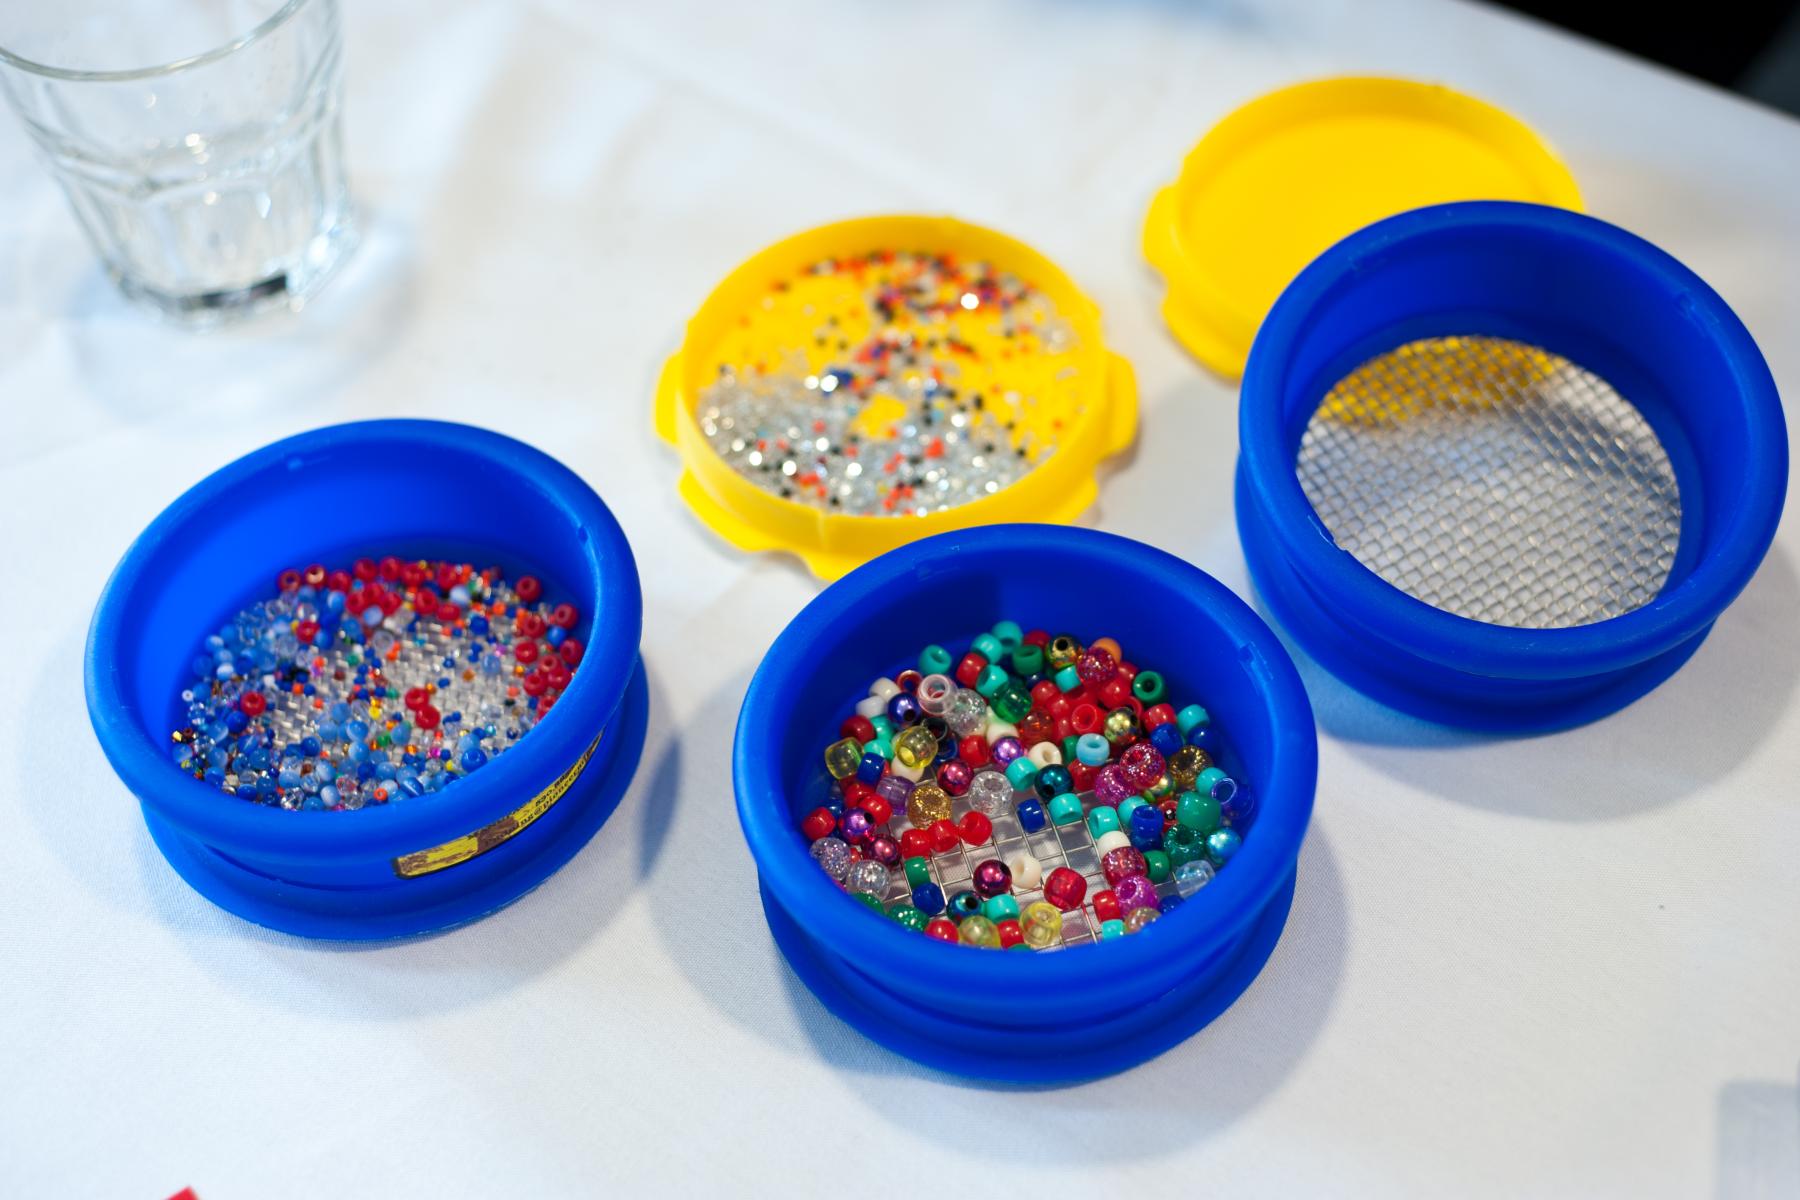 Learners pour beads into a sieve filter to sort by size